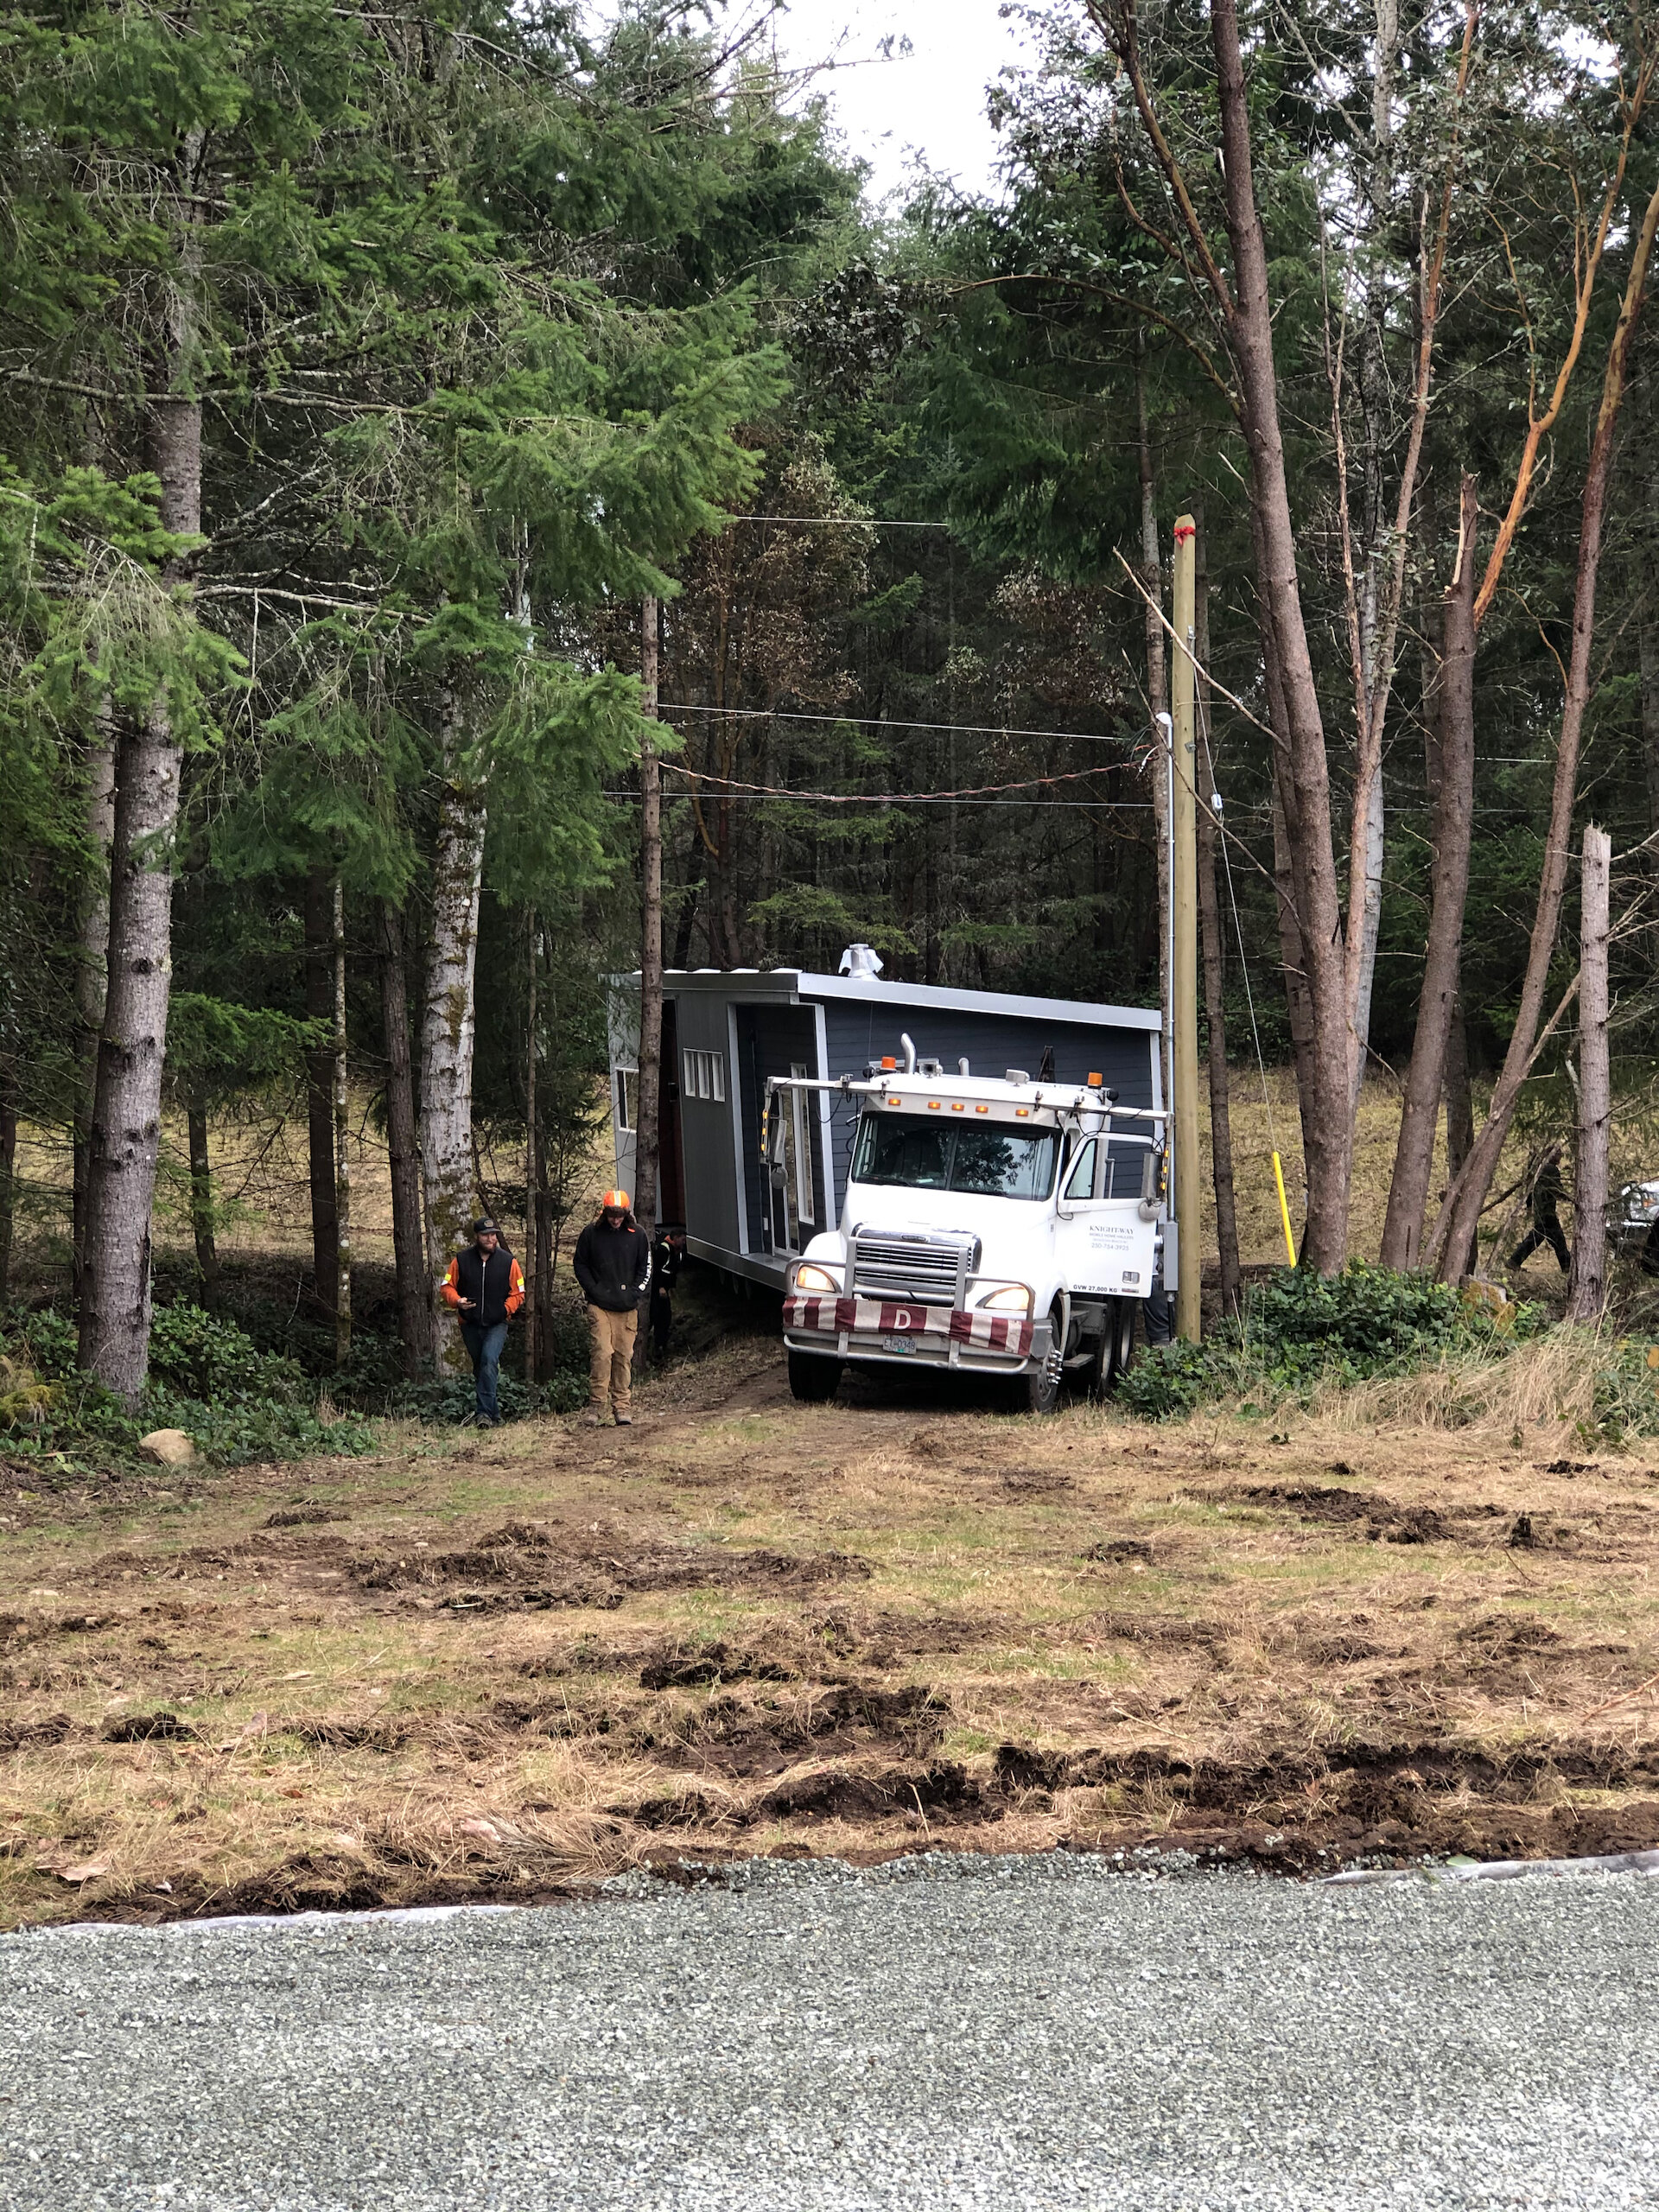  They thought they could get the cottage onto the property with the truck… 